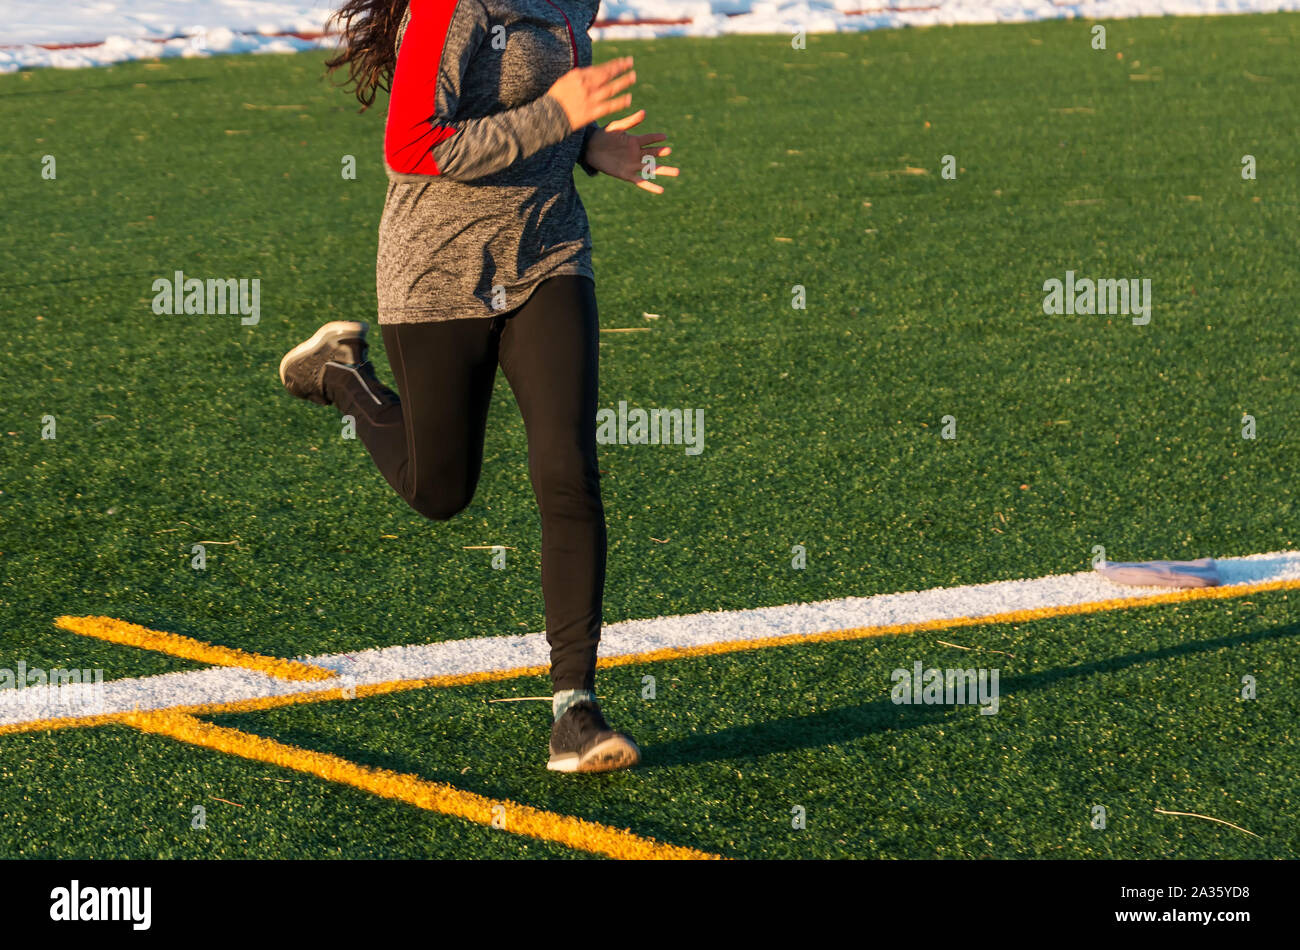 A high school female runner is running fast on a green turf field iin the winter, with snow lining the track behind her. Stock Photo